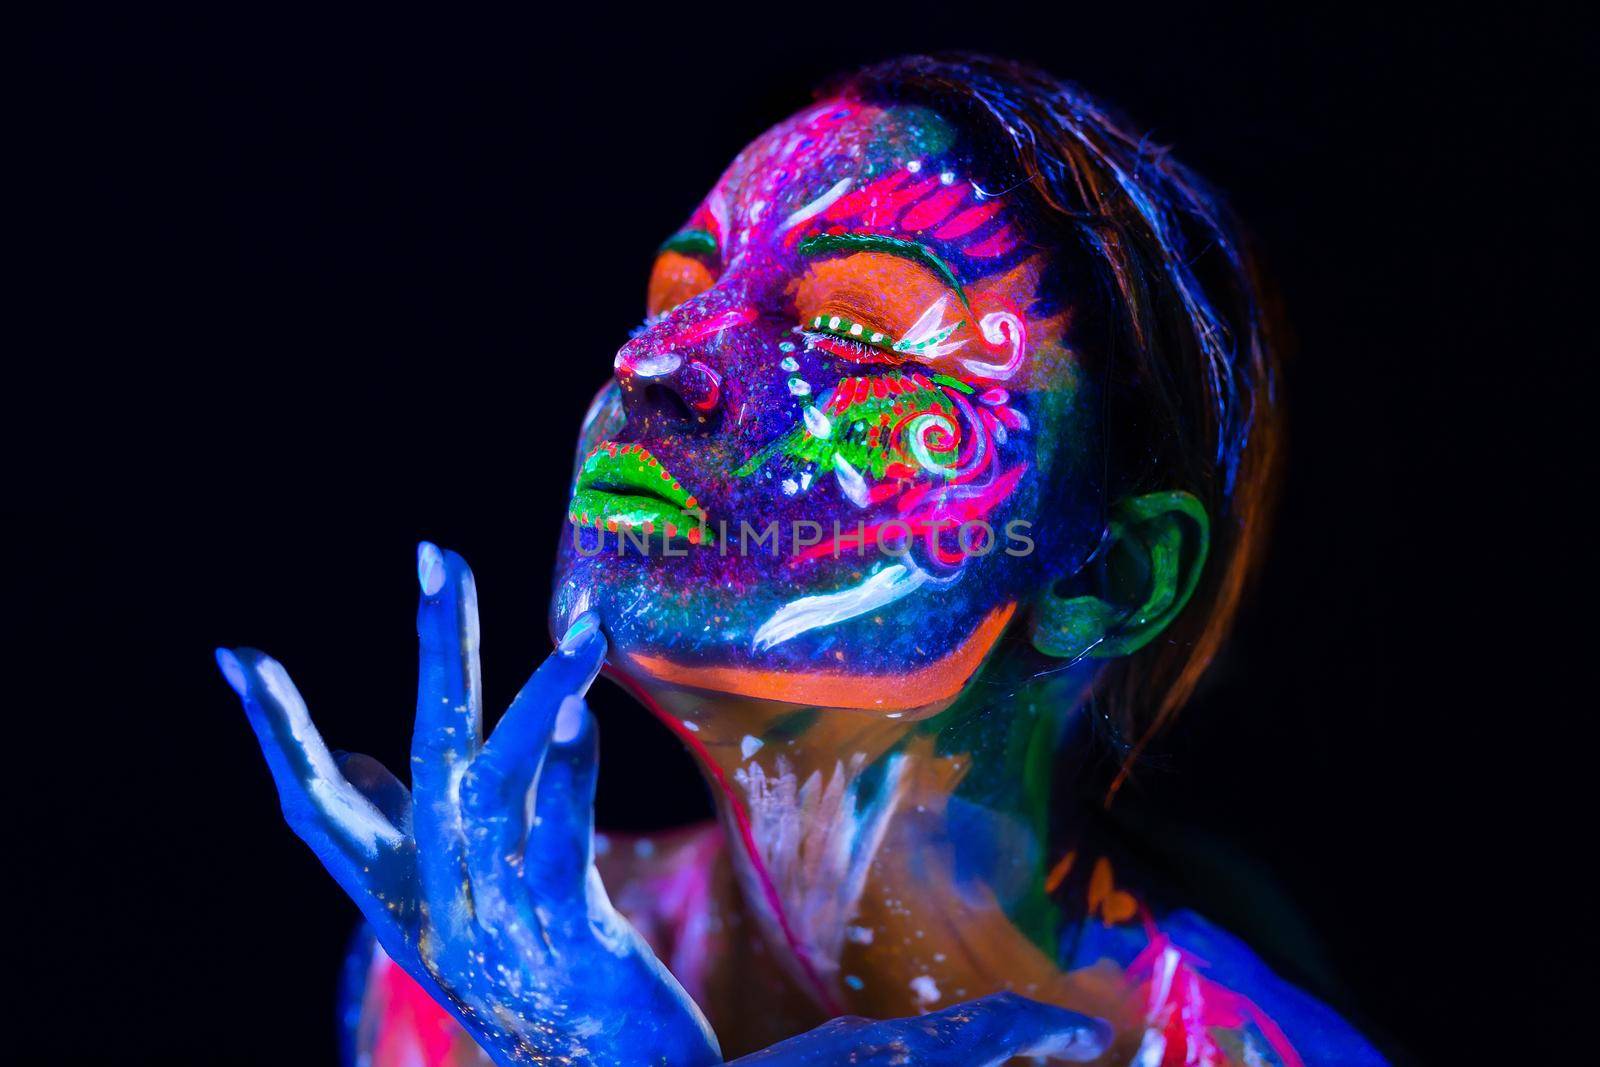 Body art glowing in ultraviolet light. Body art on the body and hand of a girl glowing in the ultraviolet light